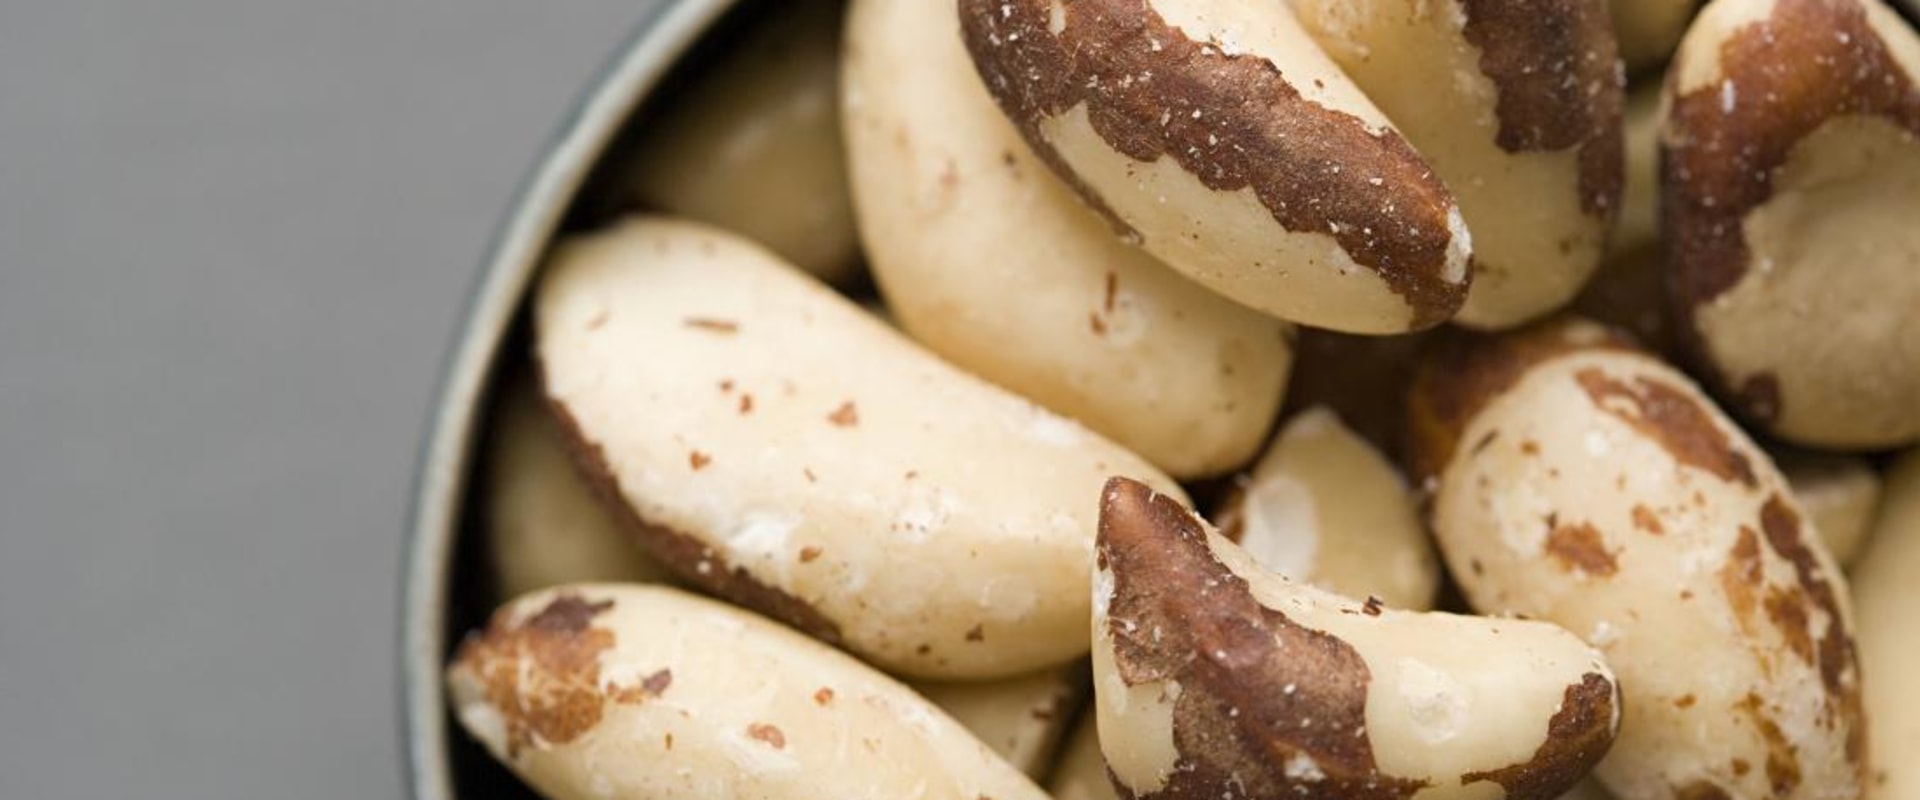 How many brazil nuts will hurt you?